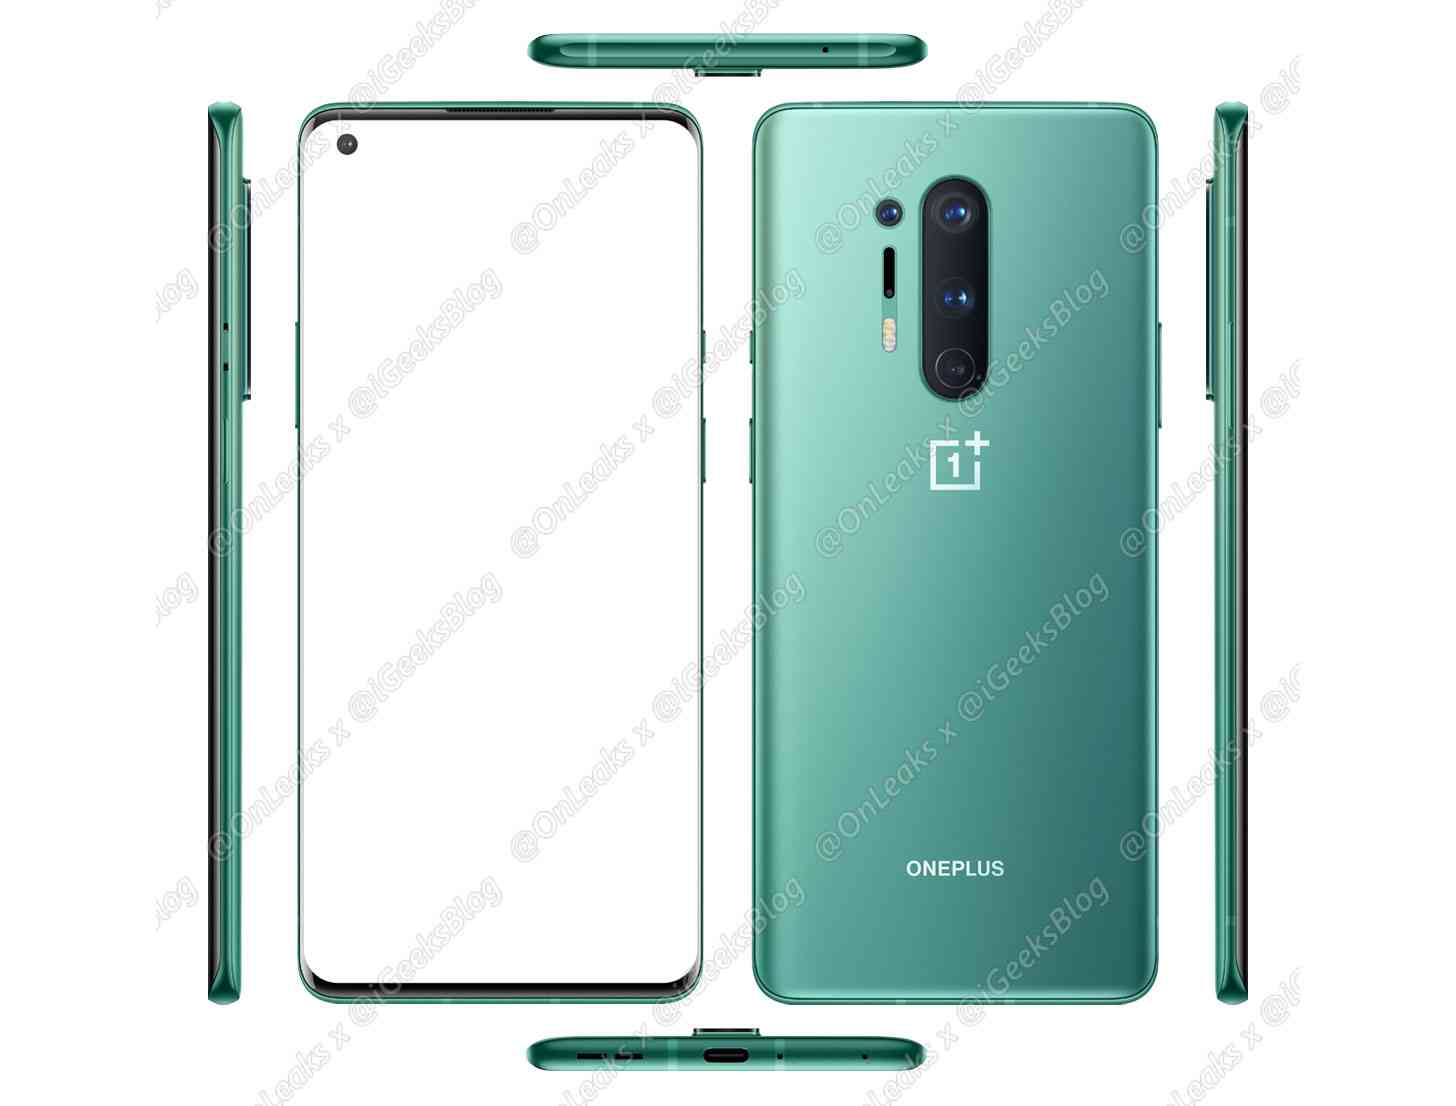 OnePlus 8 Pro green images